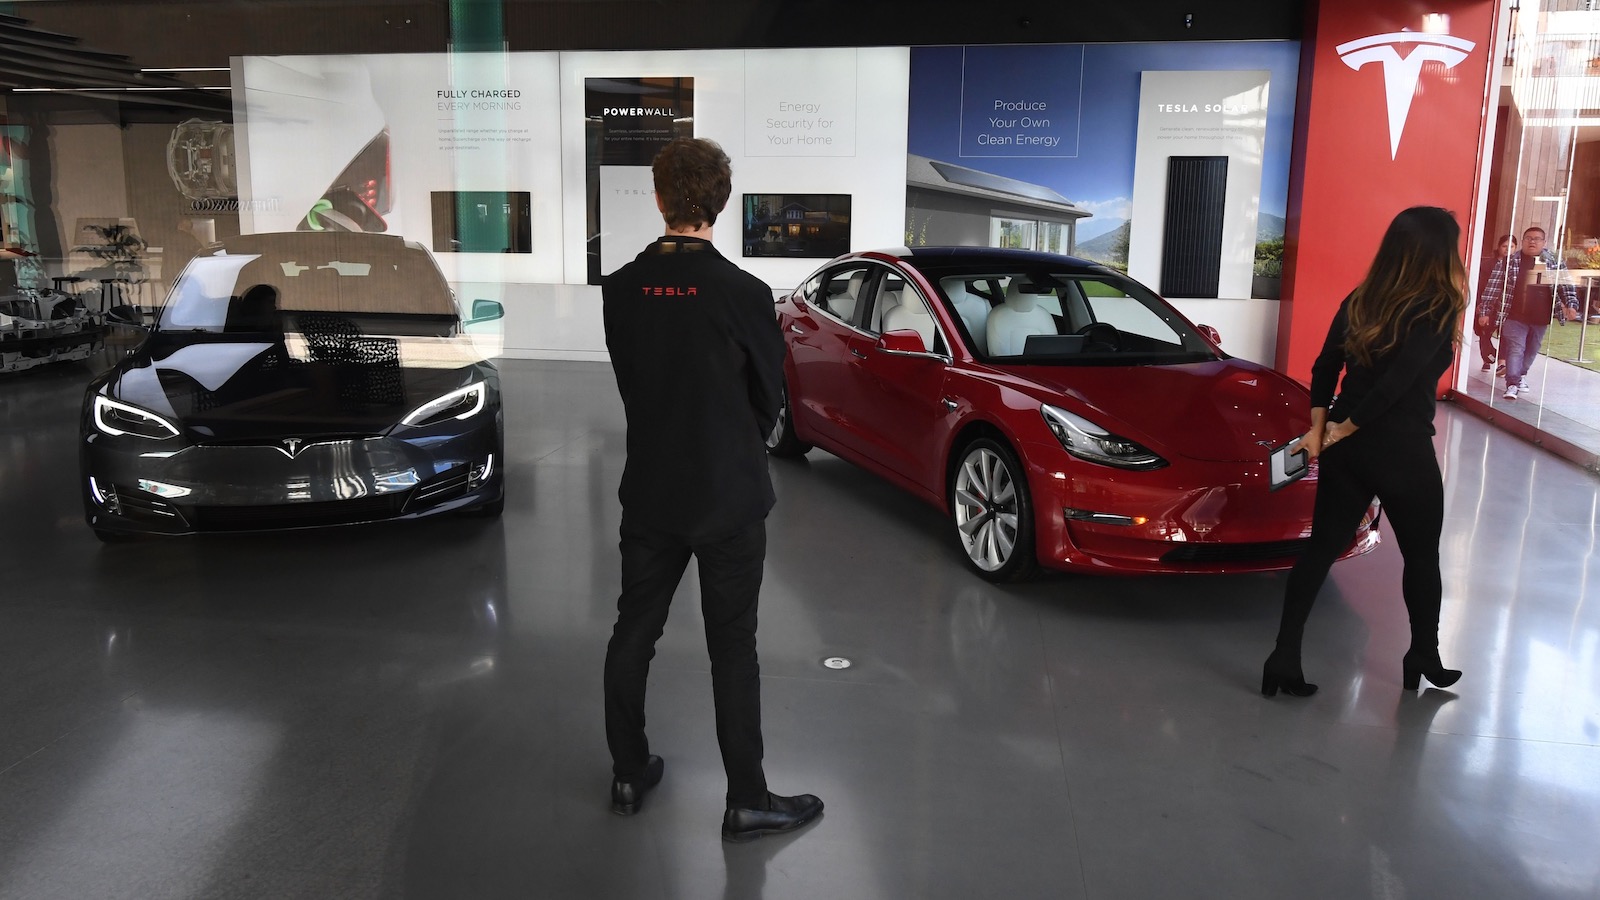 Two Tesla employees stand with their backs to the camera in a Tesla showroom with two Model S sedans.